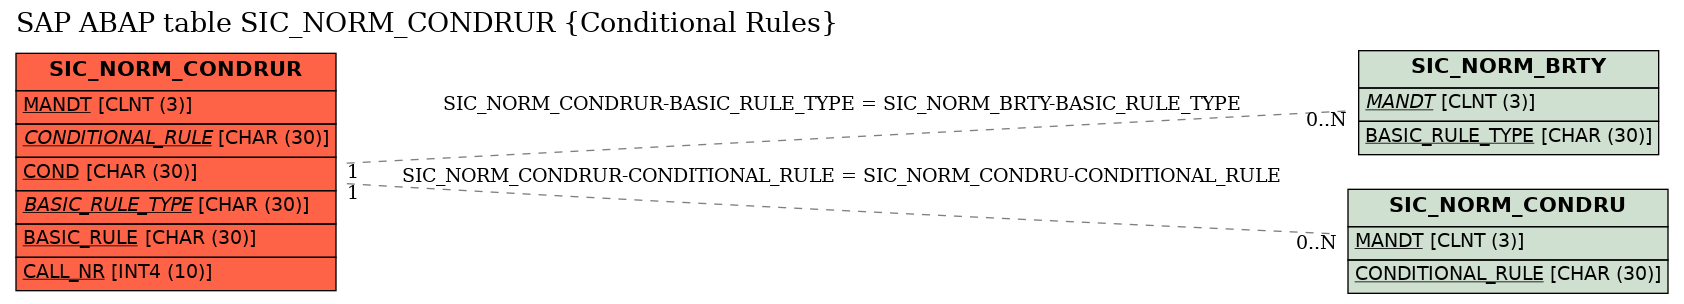 E-R Diagram for table SIC_NORM_CONDRUR (Conditional Rules)